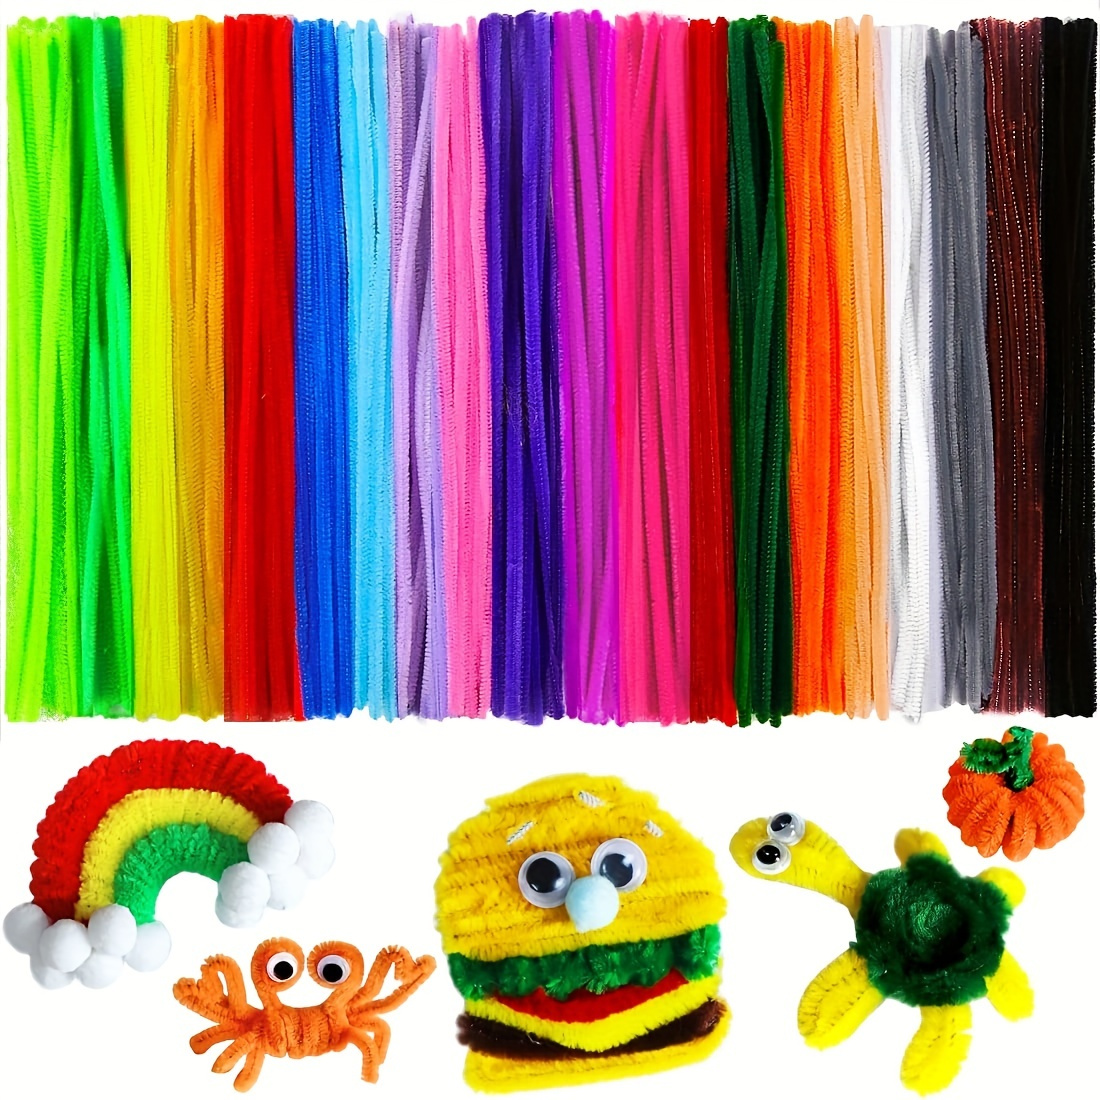 White Pipe Cleaners Craft, Pipe Cleaners Chenille Stems, Pipe Cleaners Bulk  For Diy Art Craft Christmas Decorations (white, Green, Orange, Red)400 Pcs